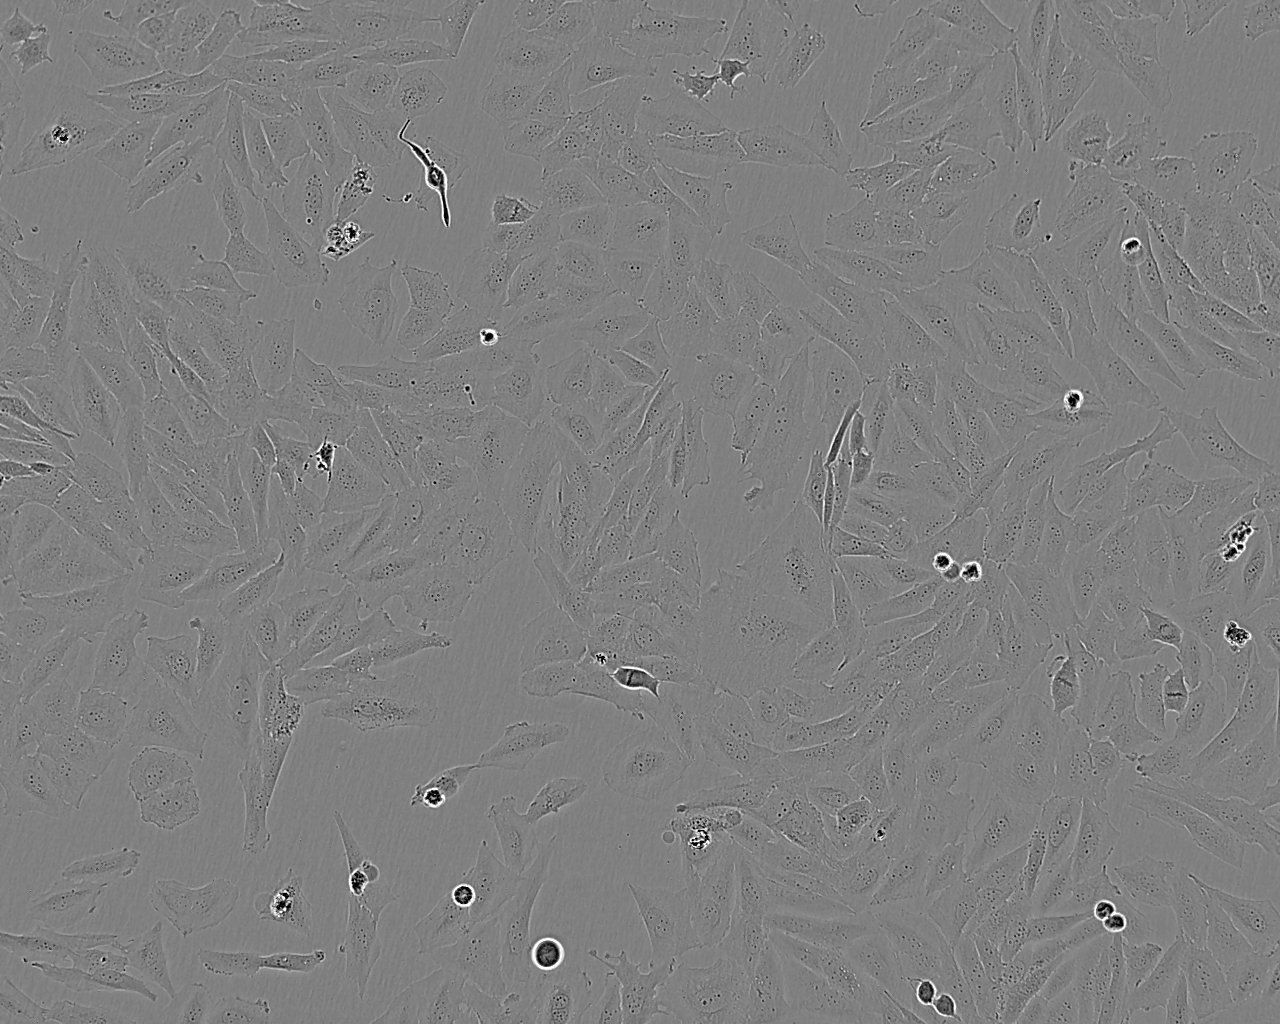 RERF-LC-MS epithelioid cells人肺癌腺癌细胞系,RERF-LC-MS epithelioid cells